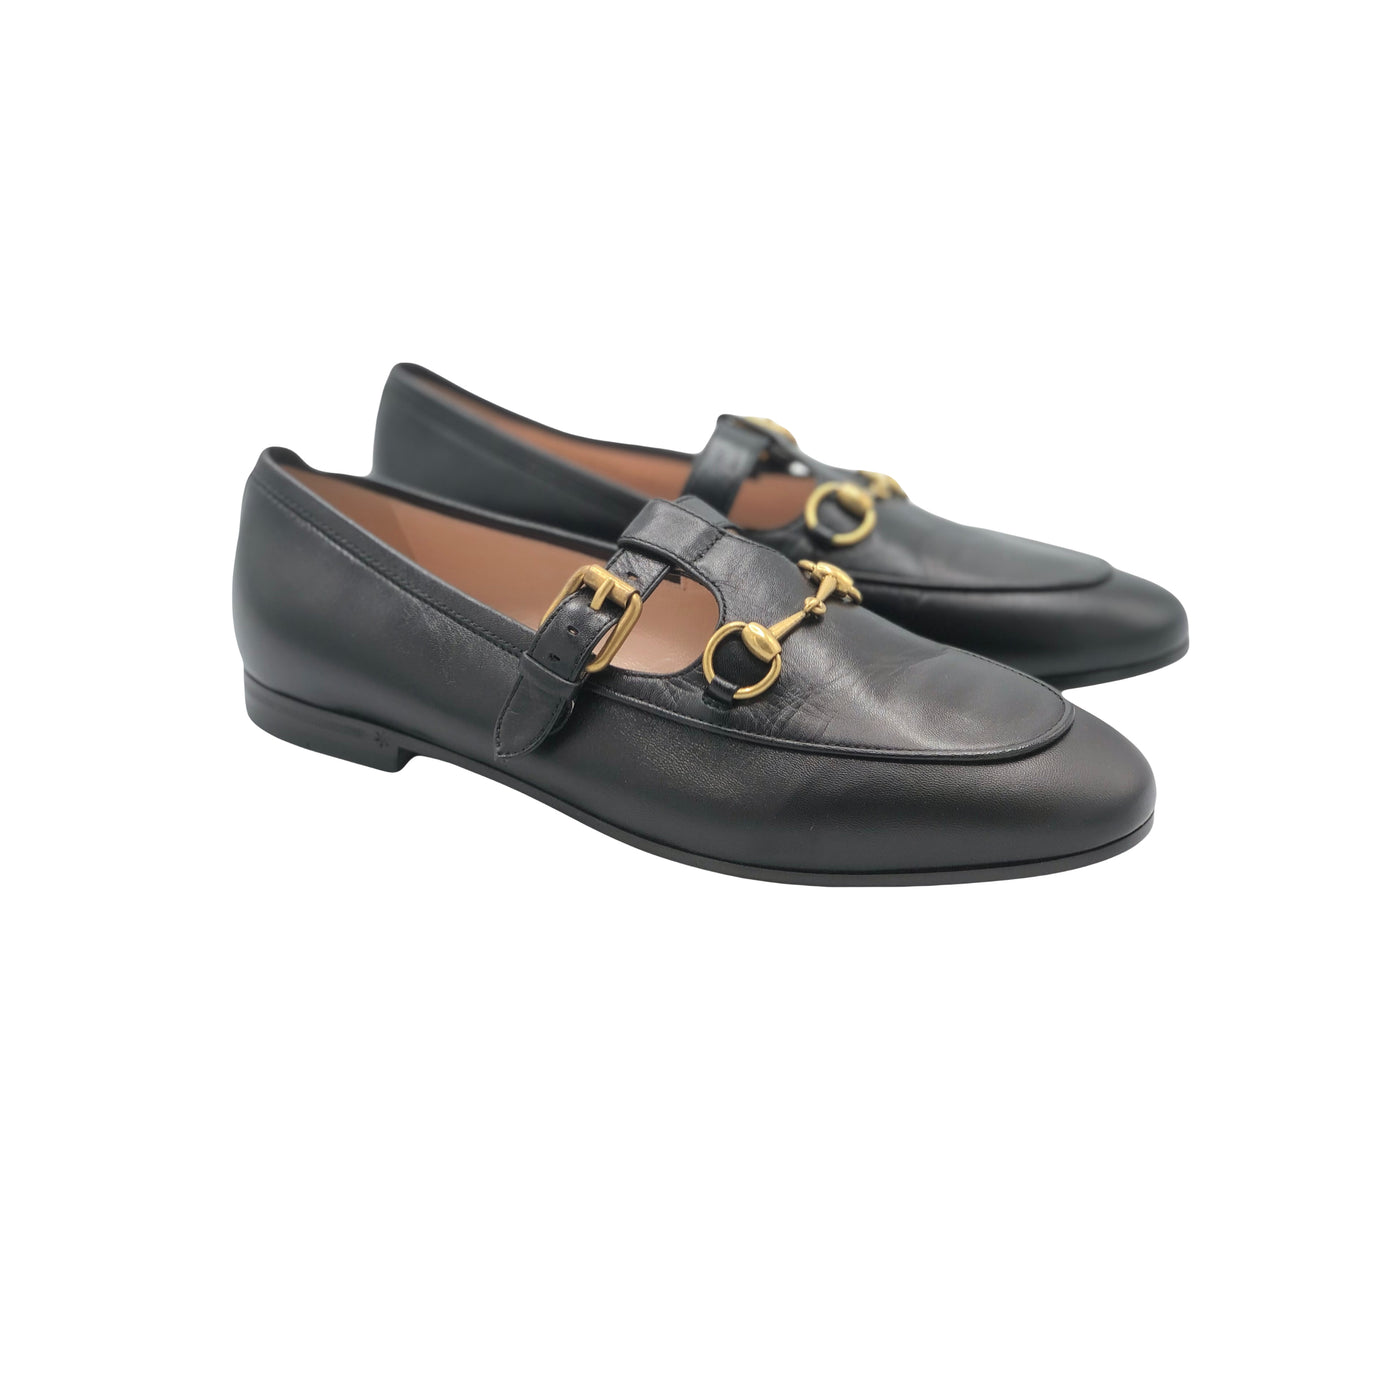 GUCCI Horsebit T bar Baby Loafers size 38 RRP: £630